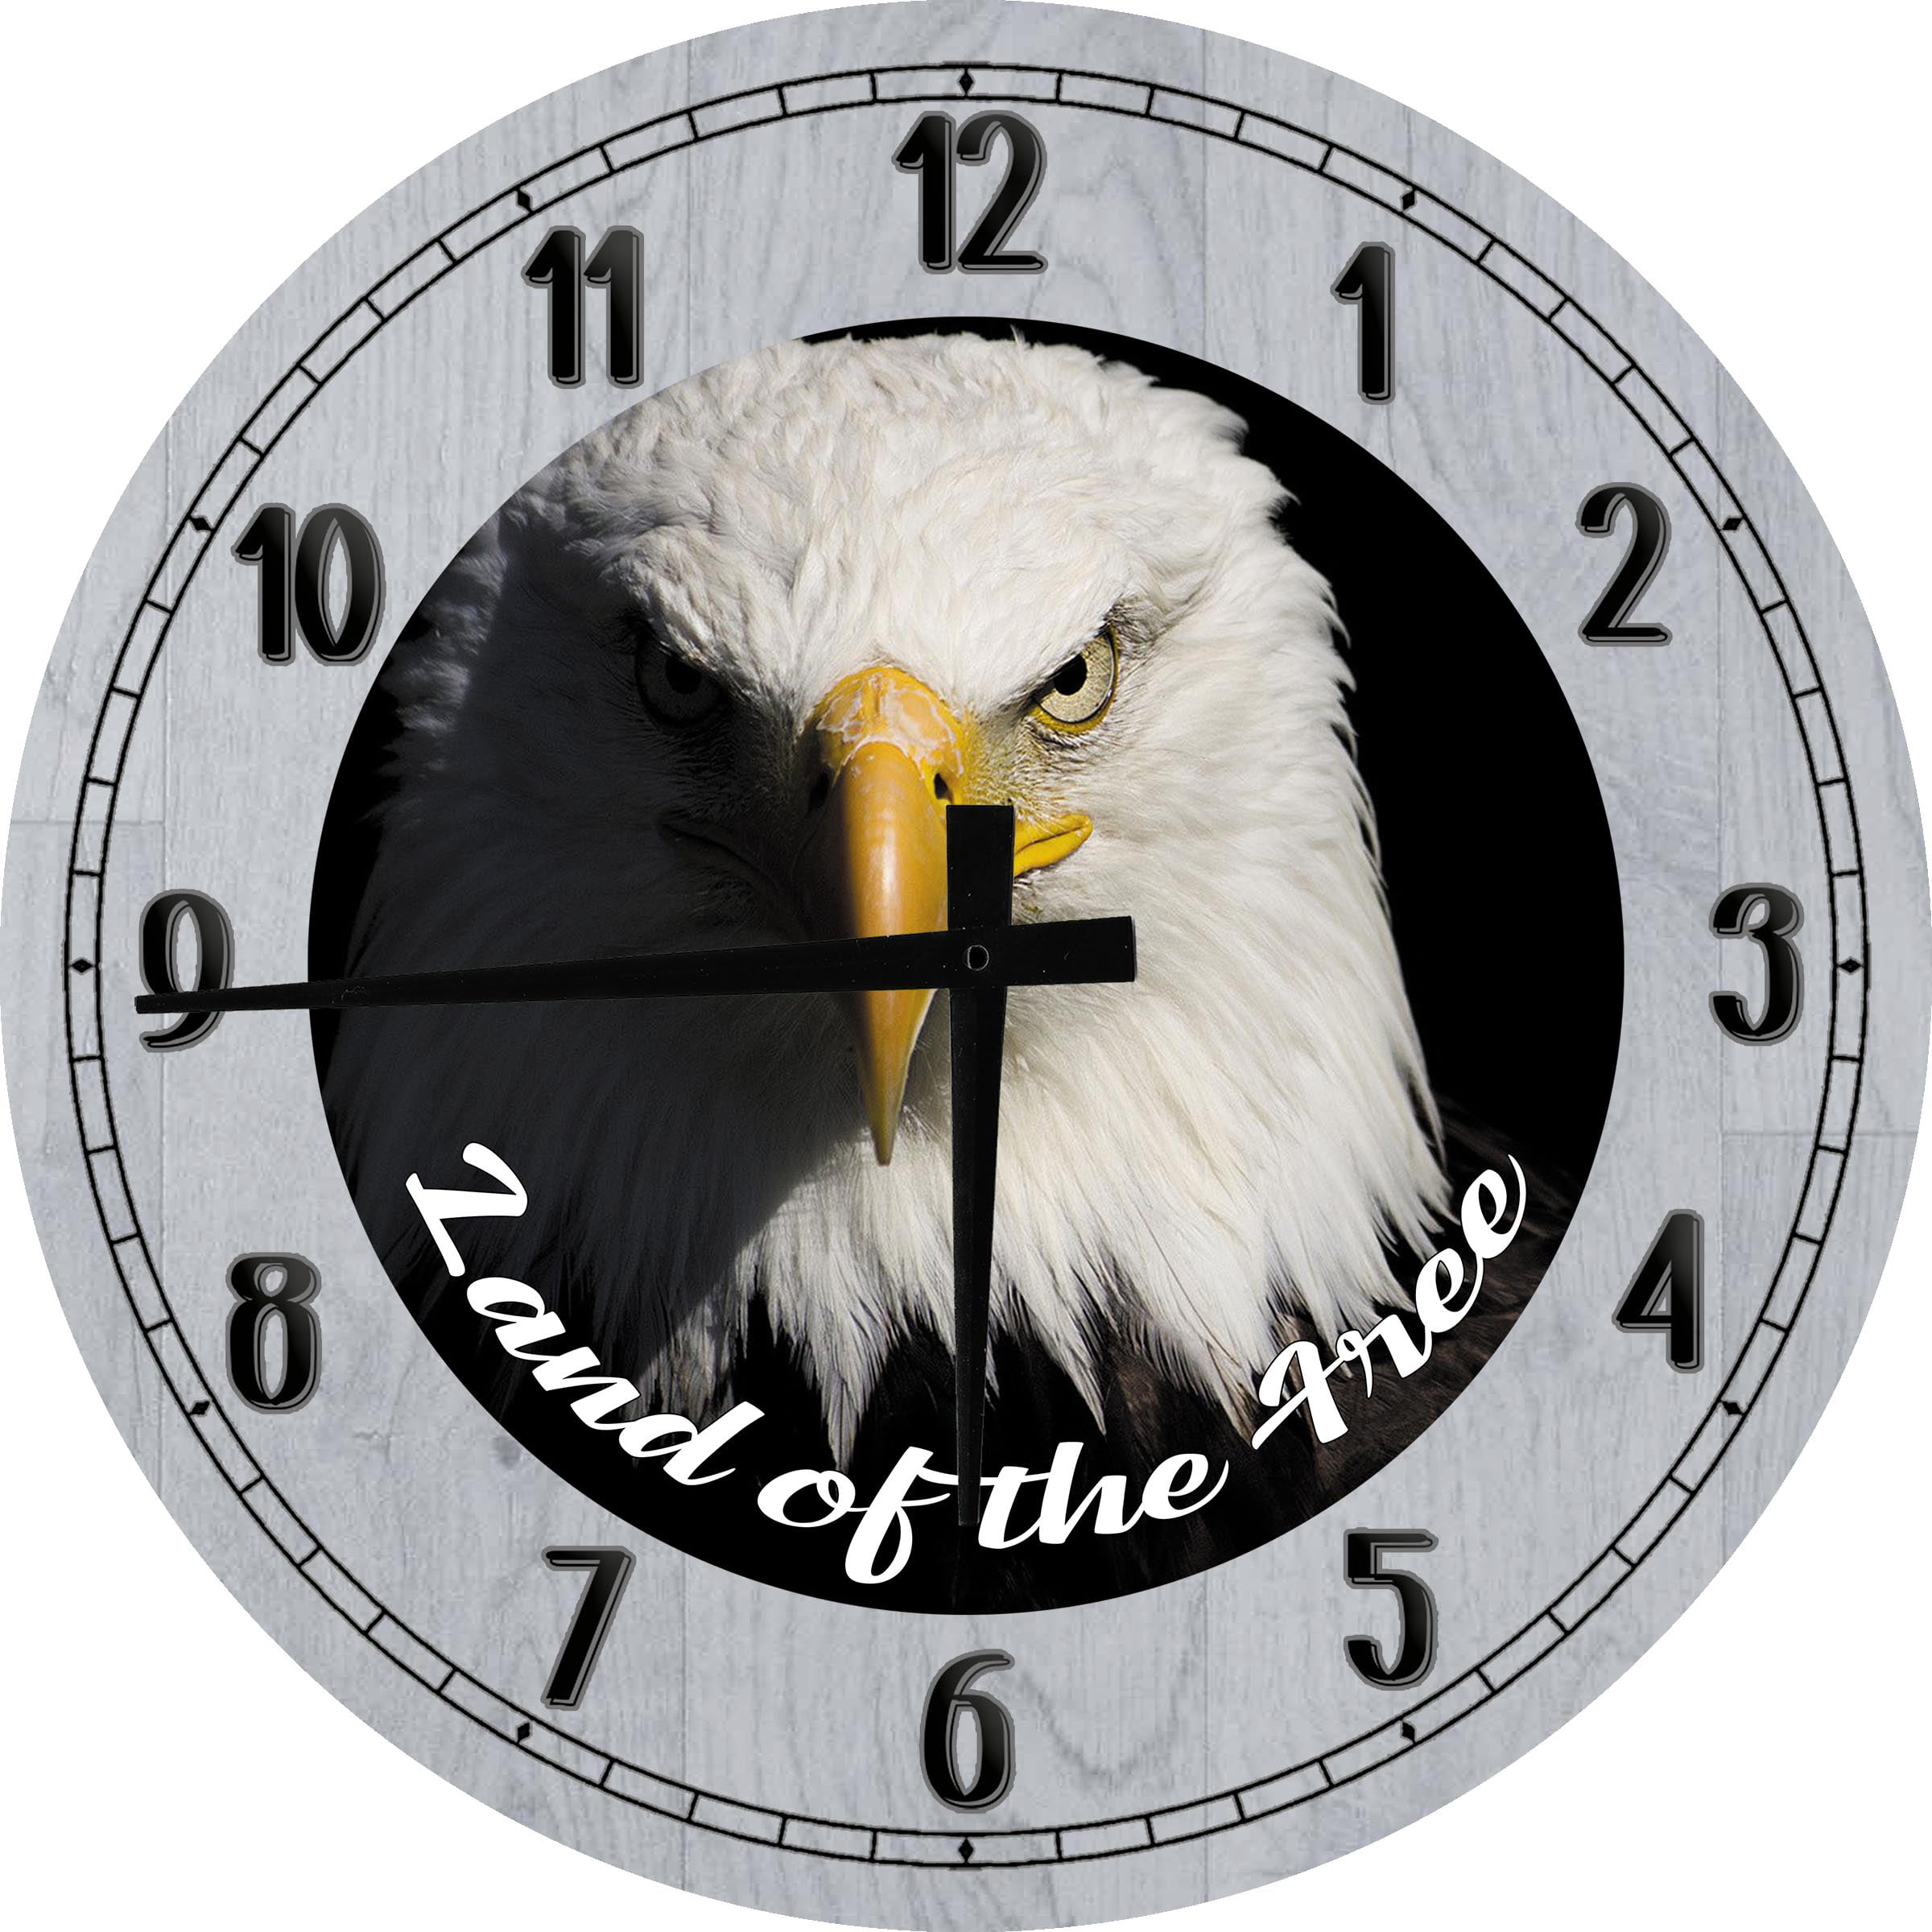 Retro Round Wooden Wall Clock The U.S.A Flag and Eagle Home Office Wall Decor 